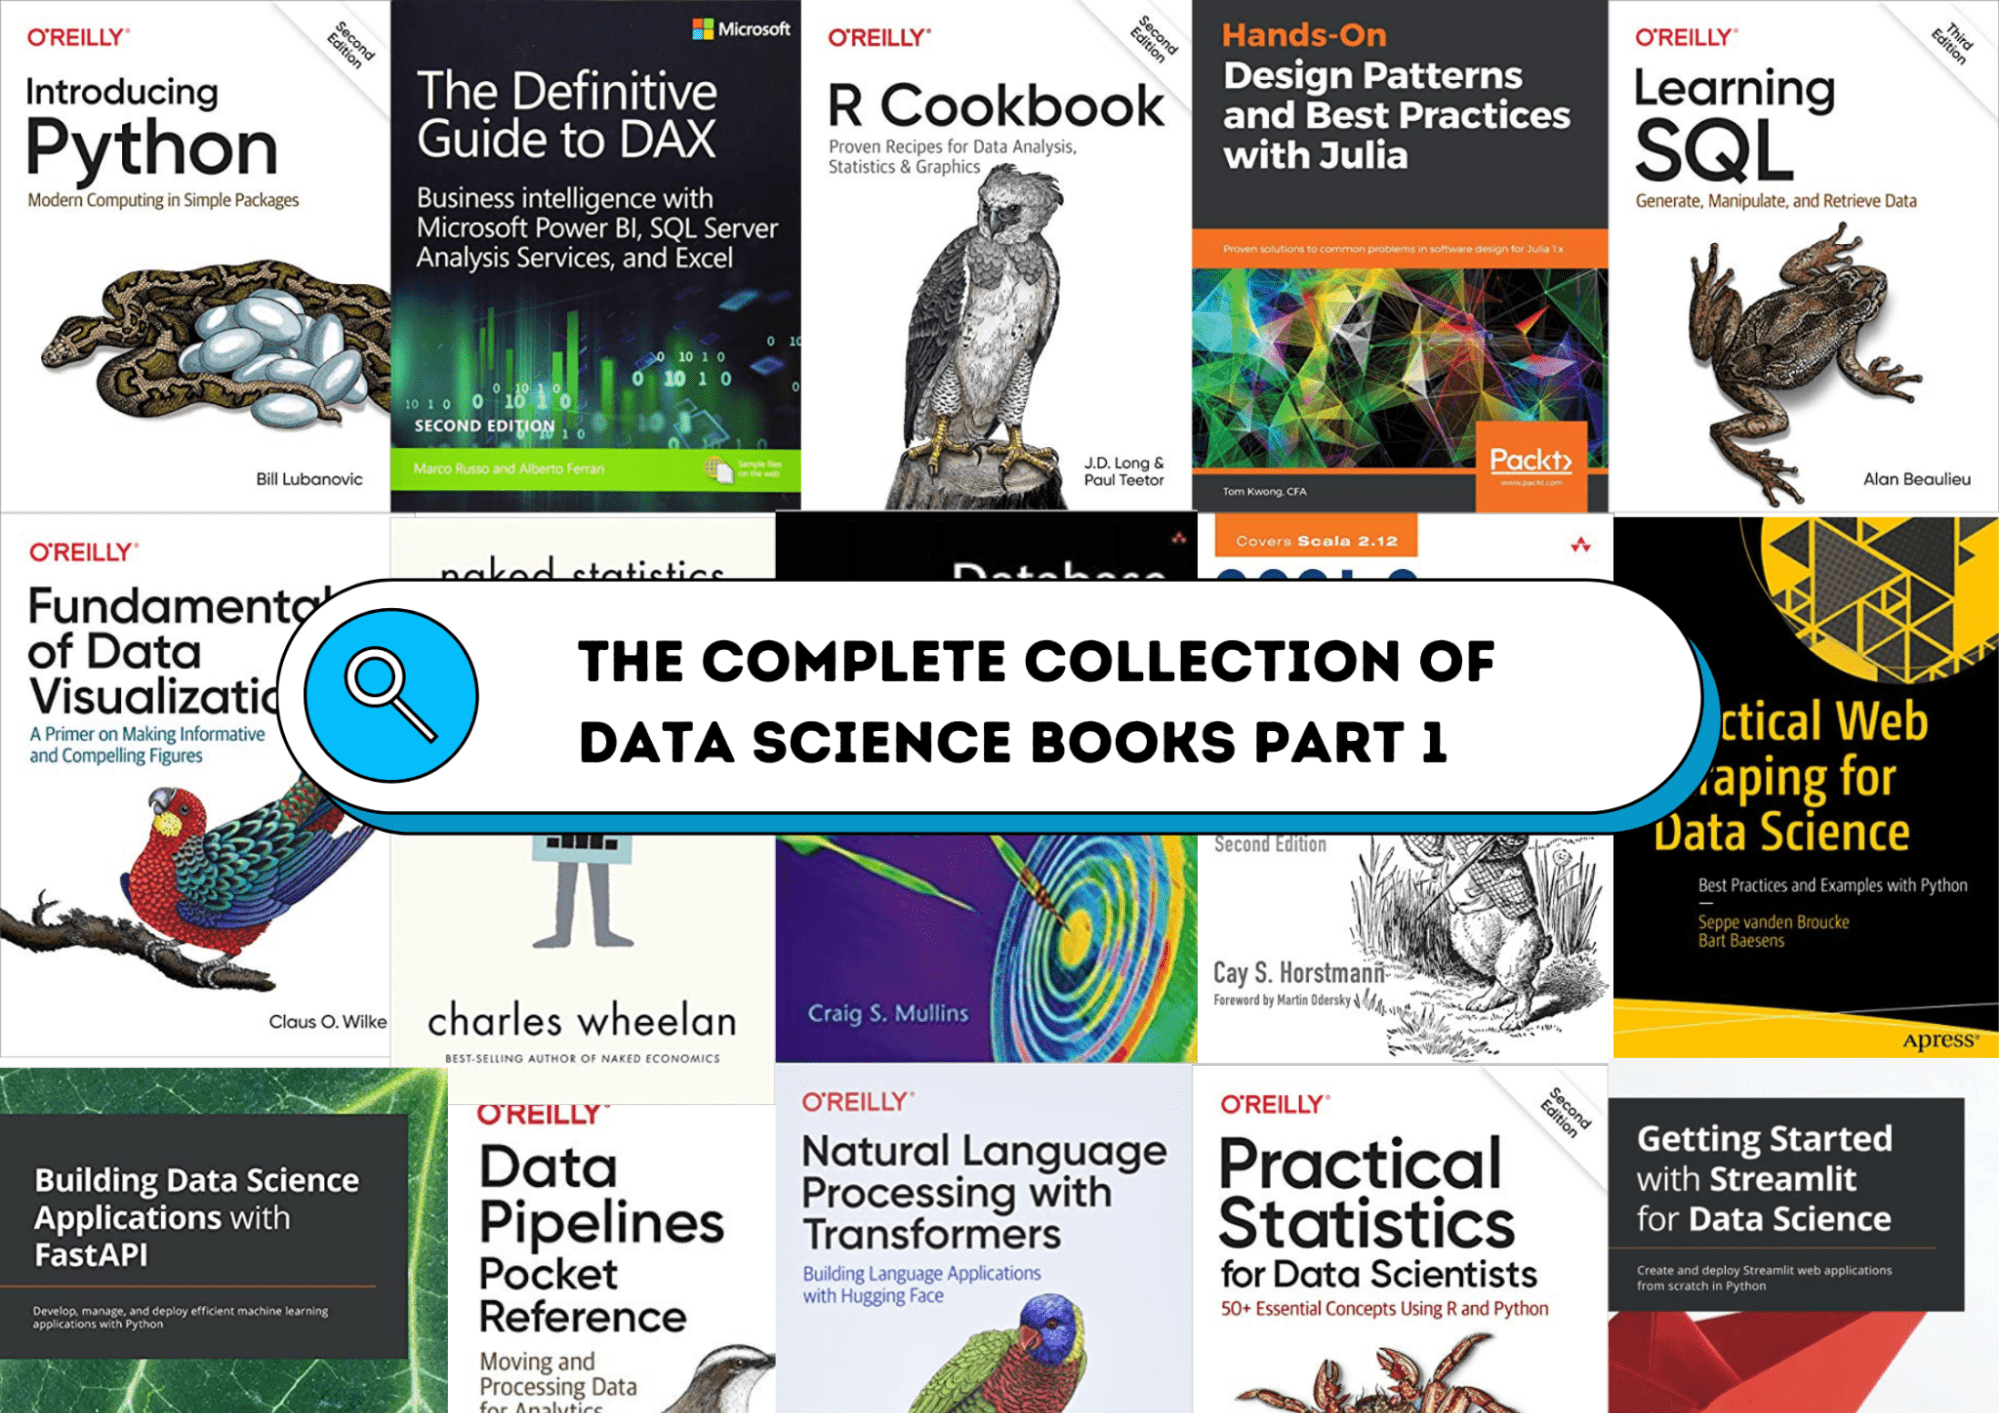 The Complete Collection of Data Science Books - Part 1